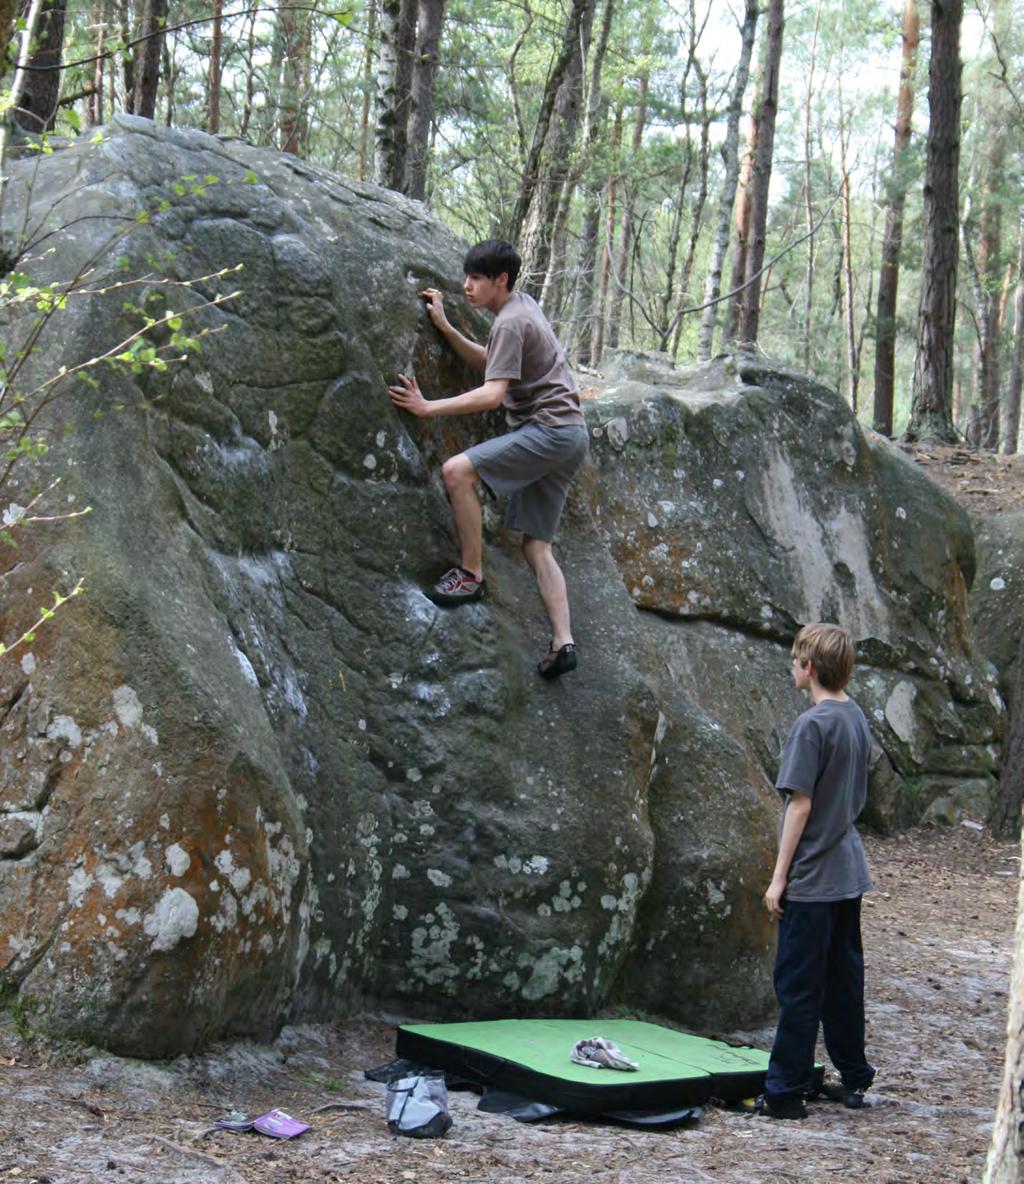 Fontainebleau Bouldering Thursday 29th March Thursday 5th April A week long trip to the bouldering capital of Europe in northern France.